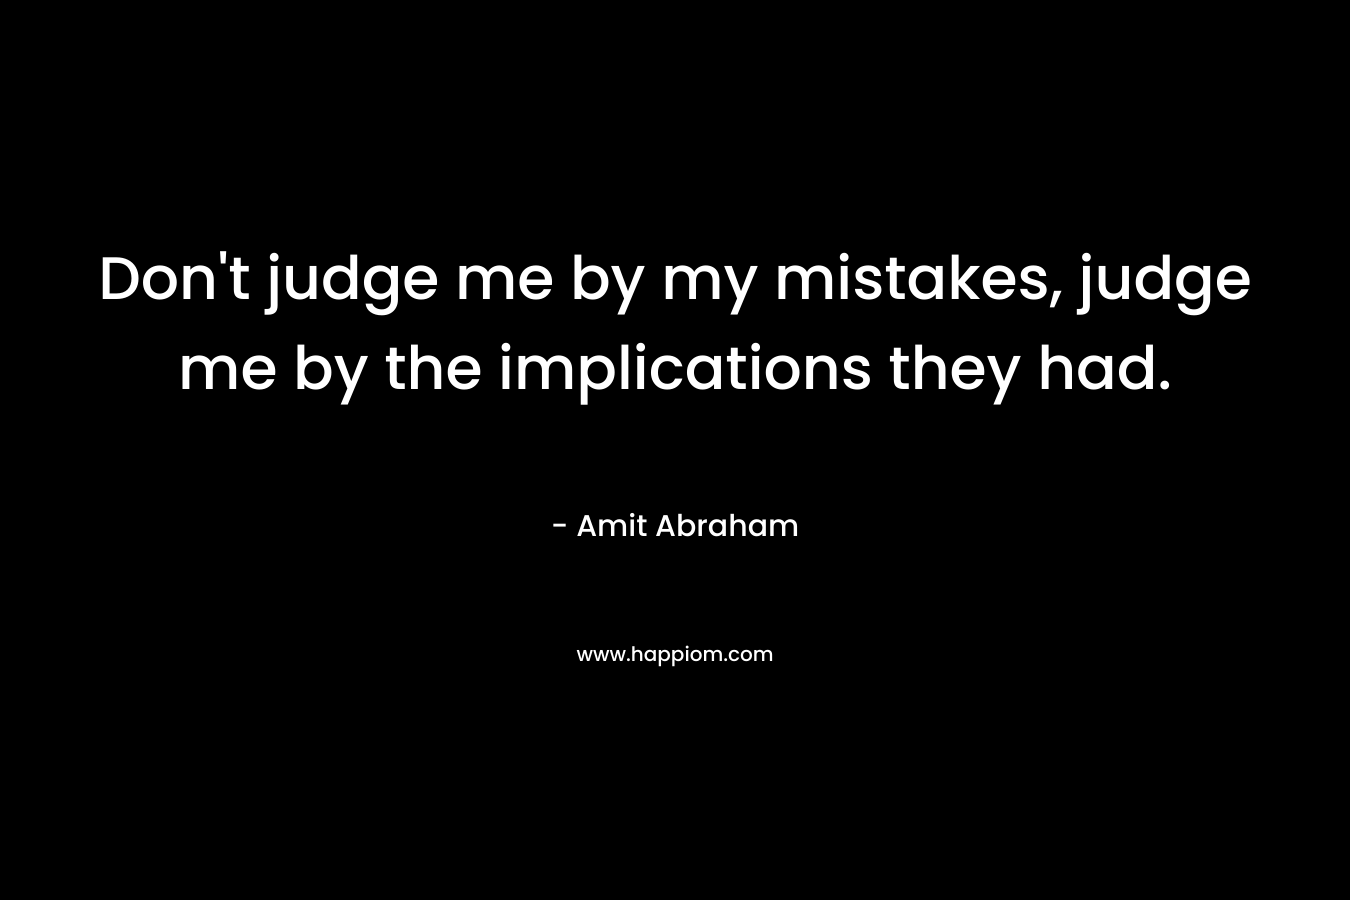 Don’t judge me by my mistakes, judge me by the implications they had. – Amit Abraham